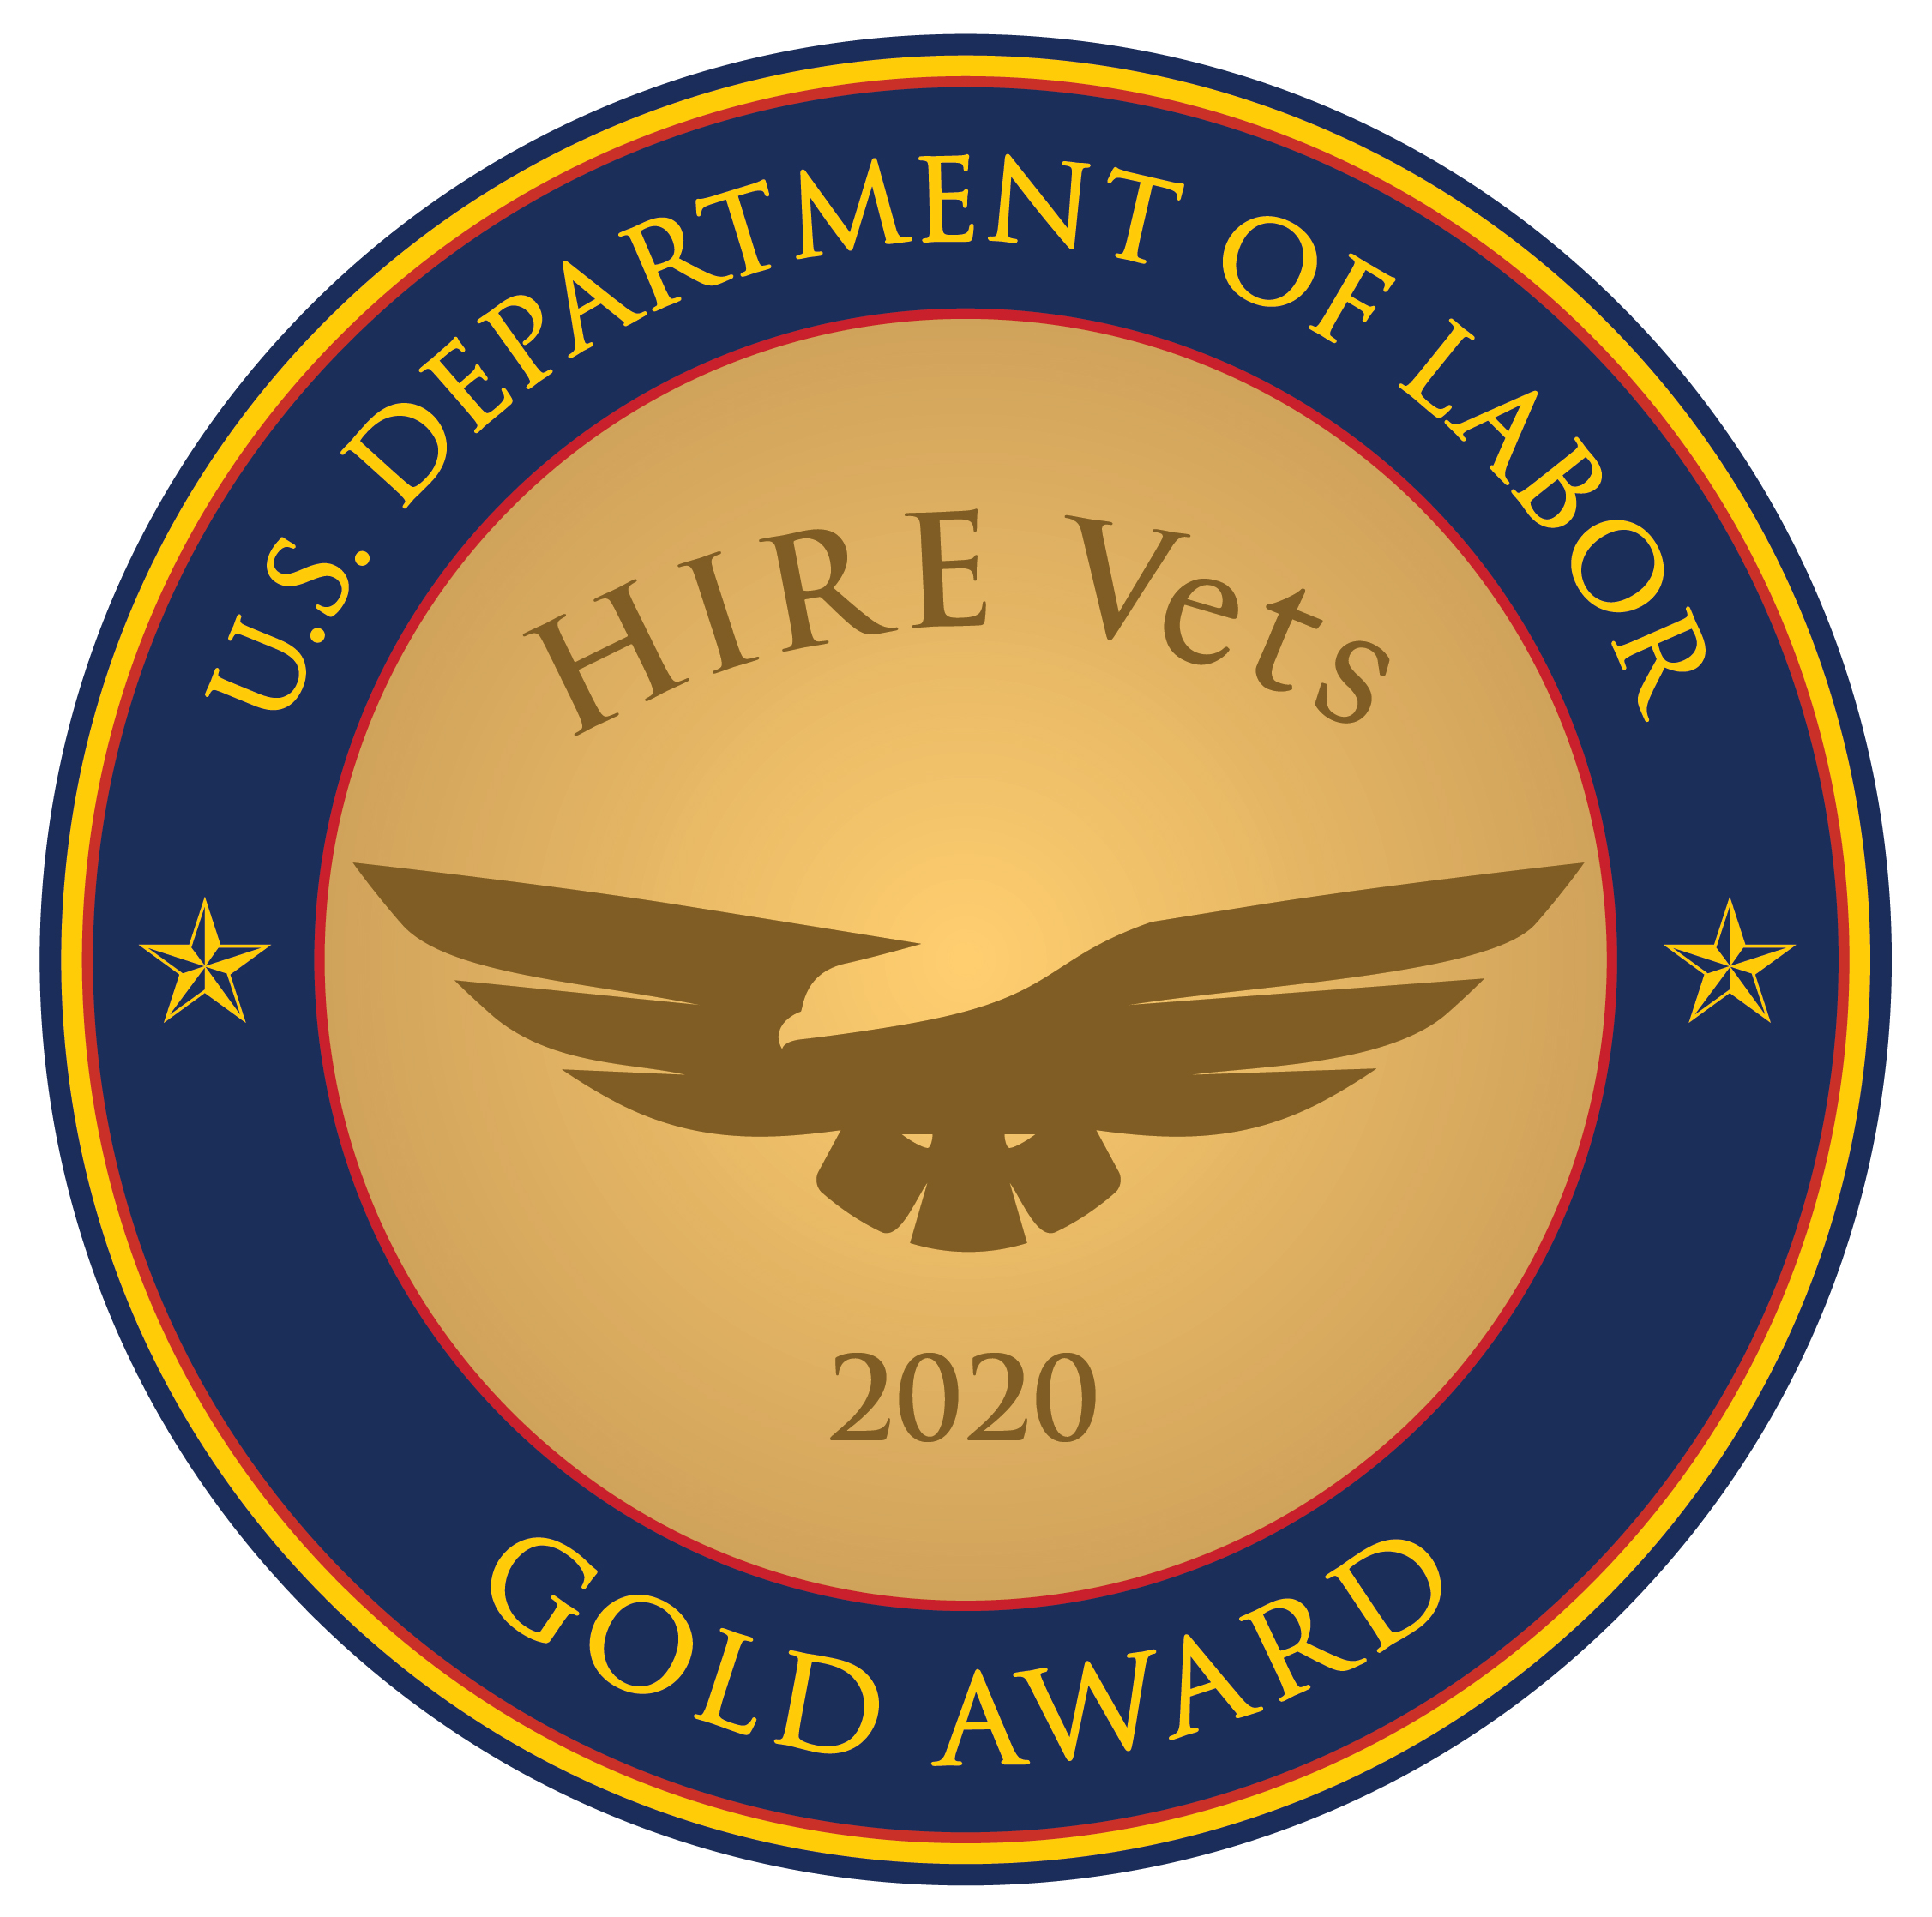 Graphic: HIRE Vets Gold Award 2020